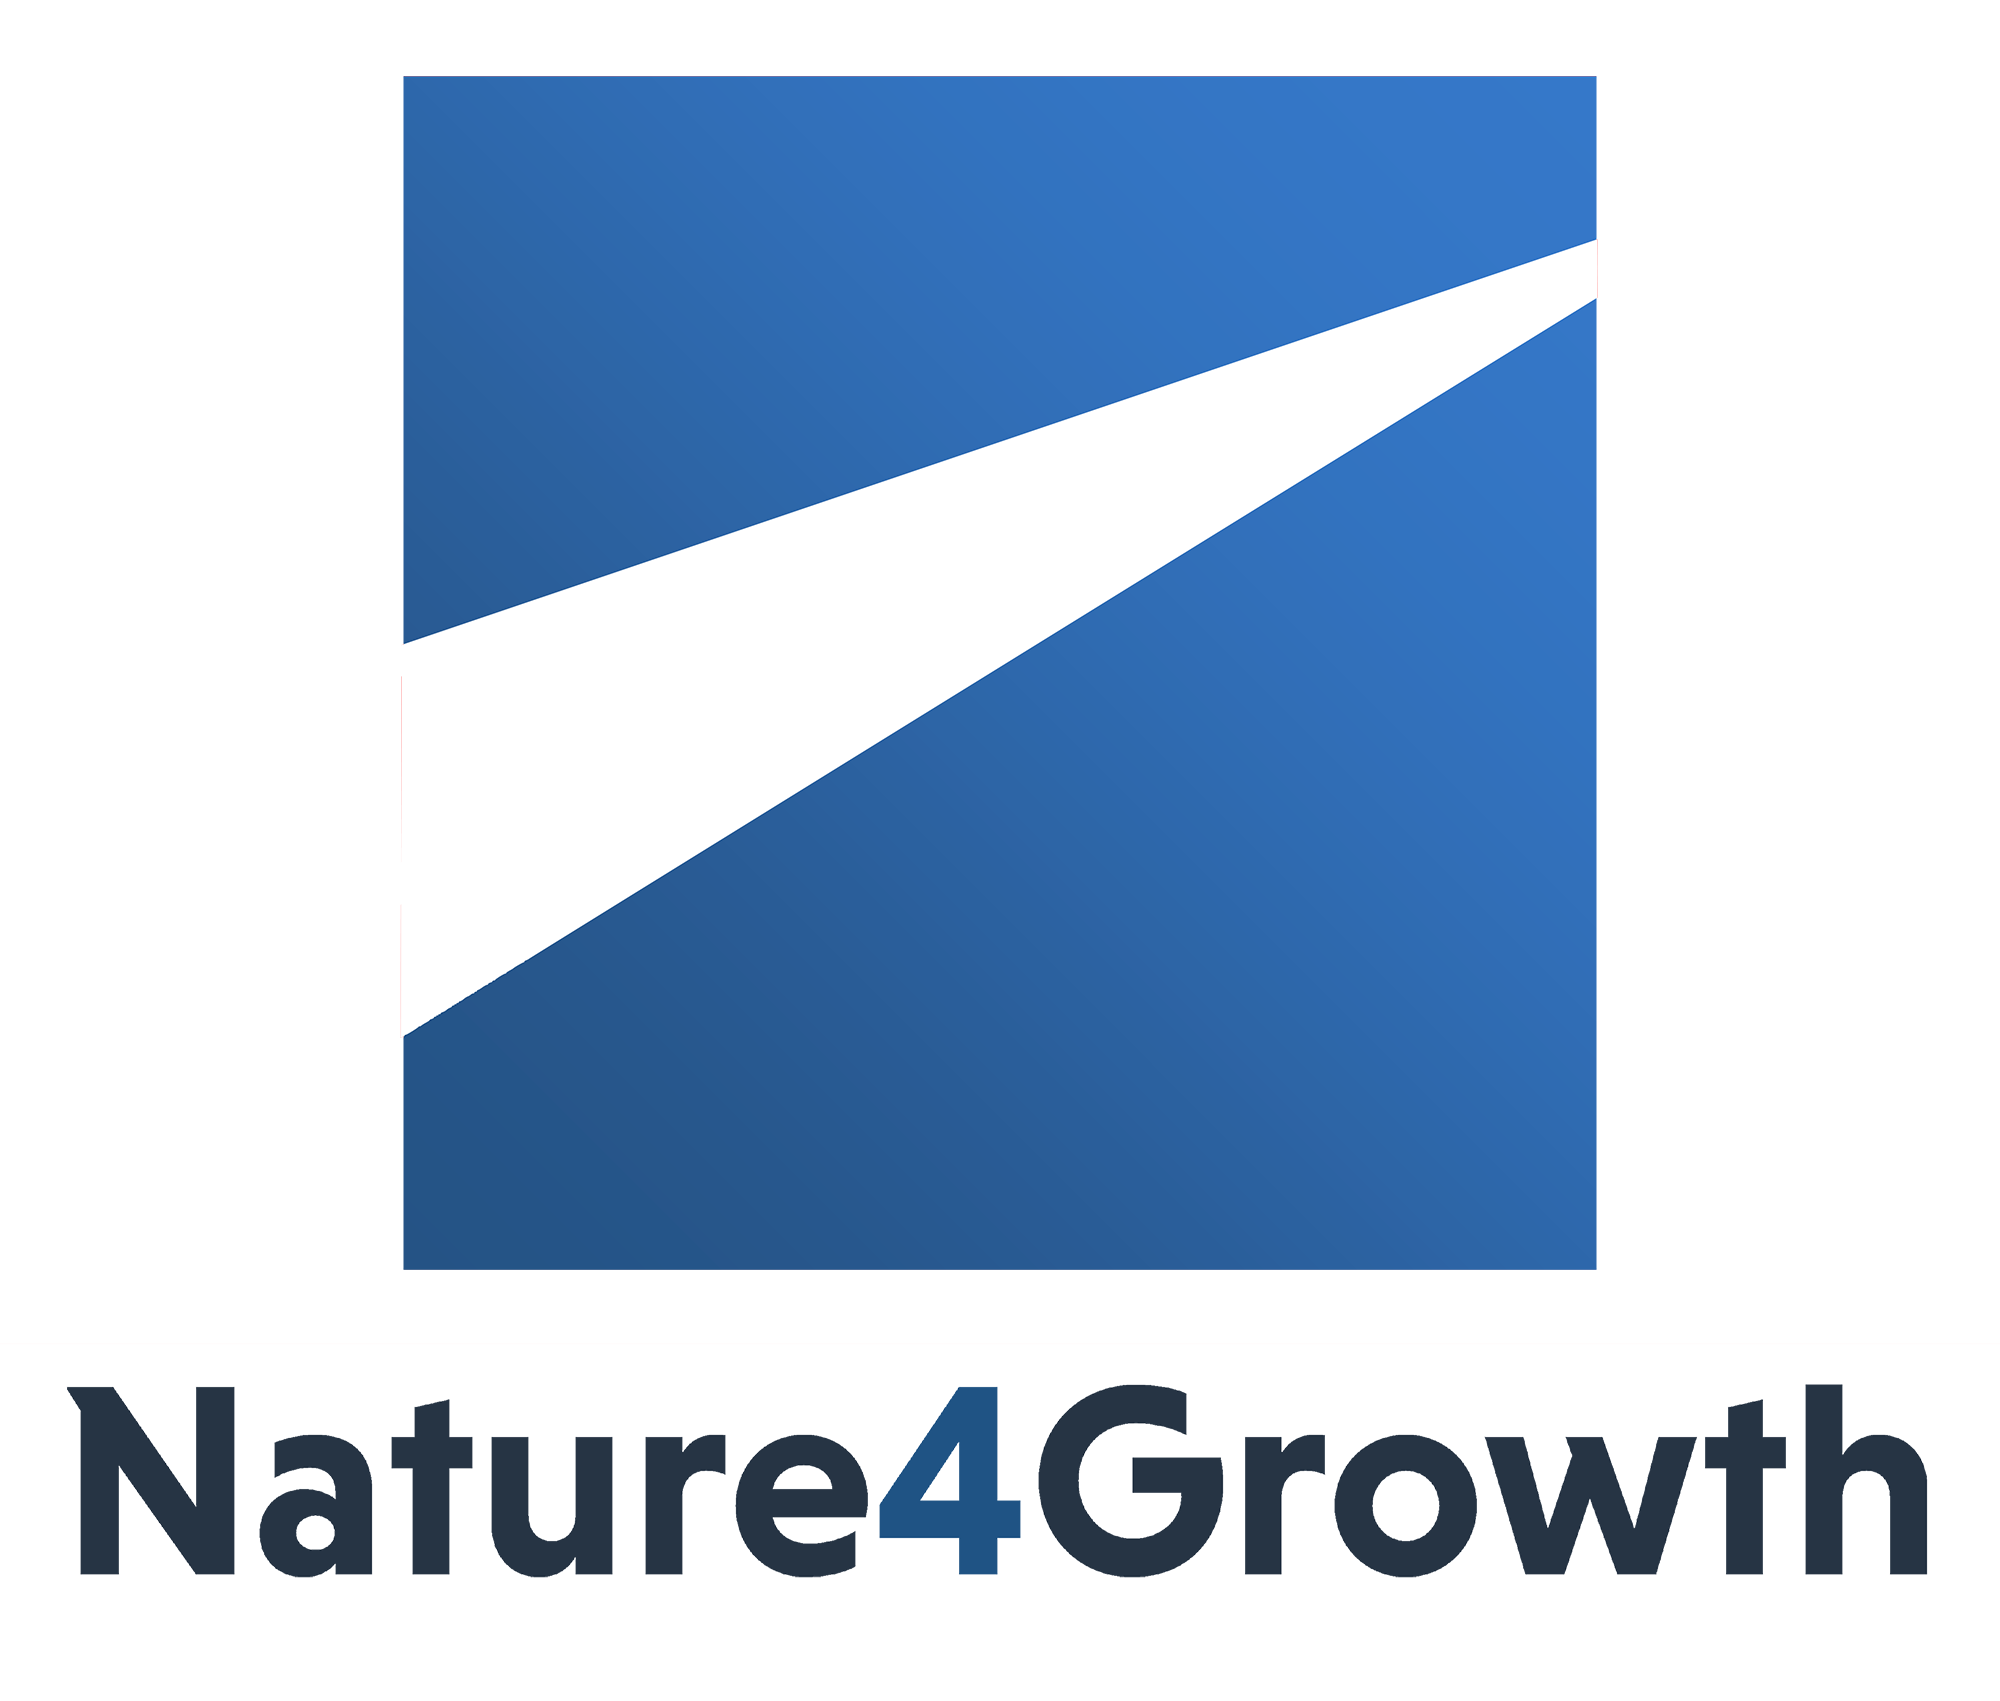 Nature4Growth